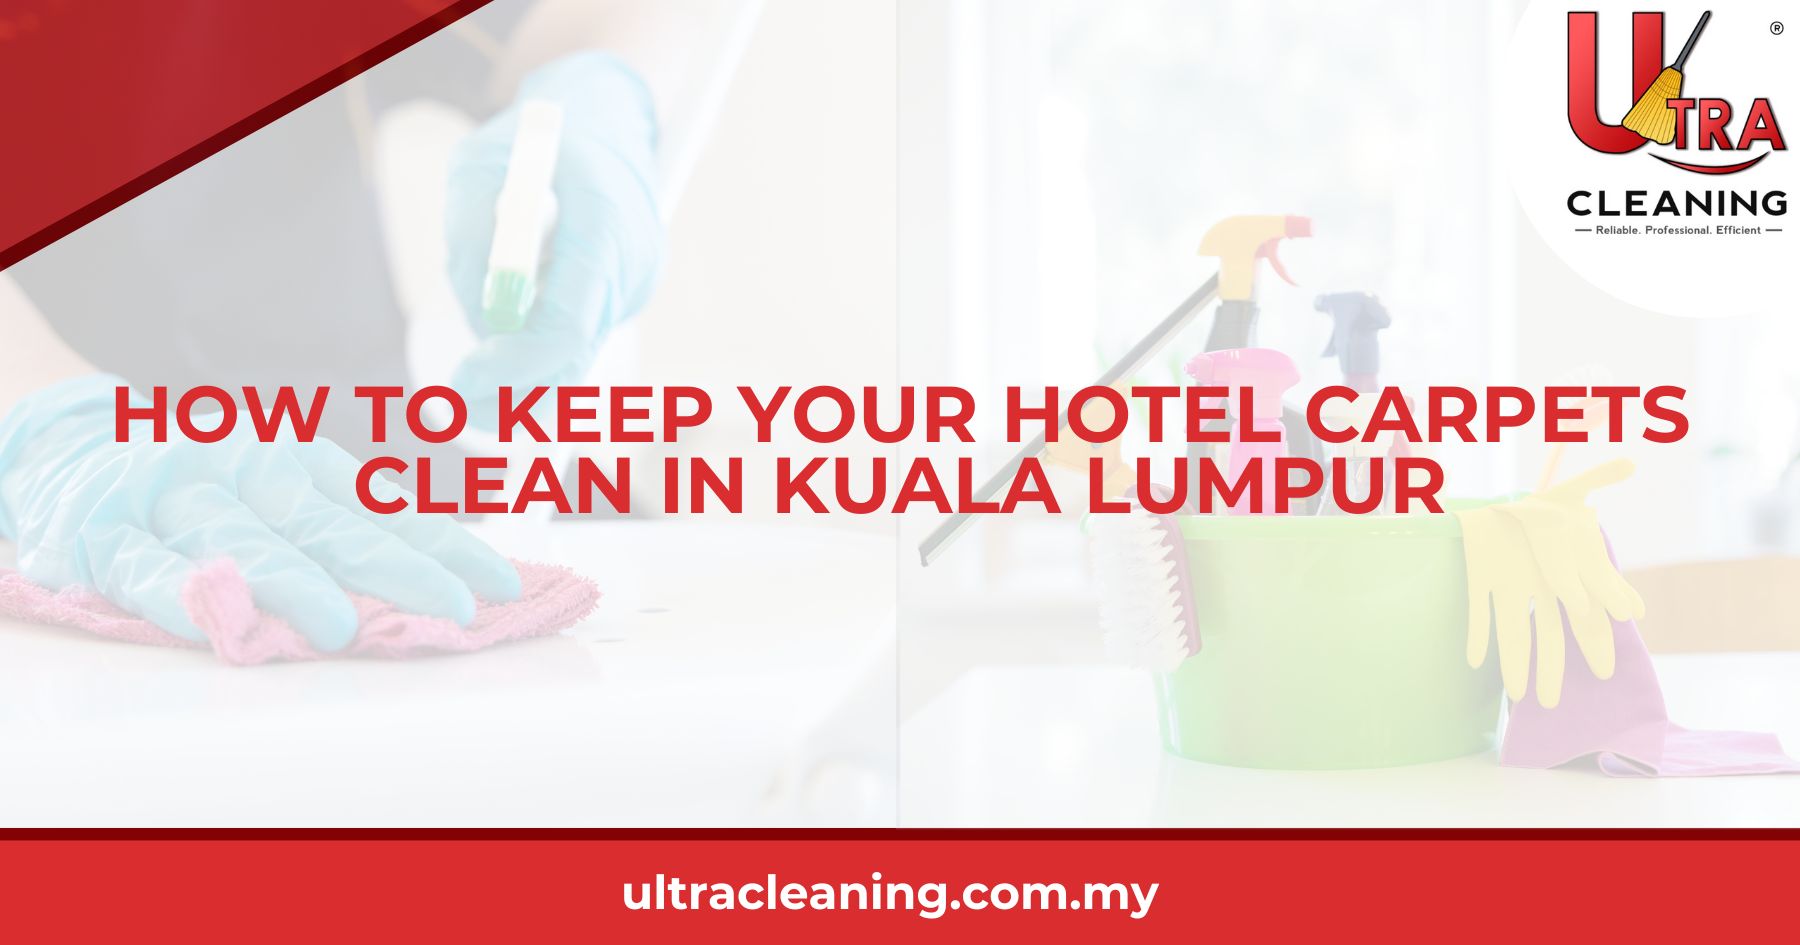 How to Keep Your Hotel Carpets Clean in Kuala Lumpur